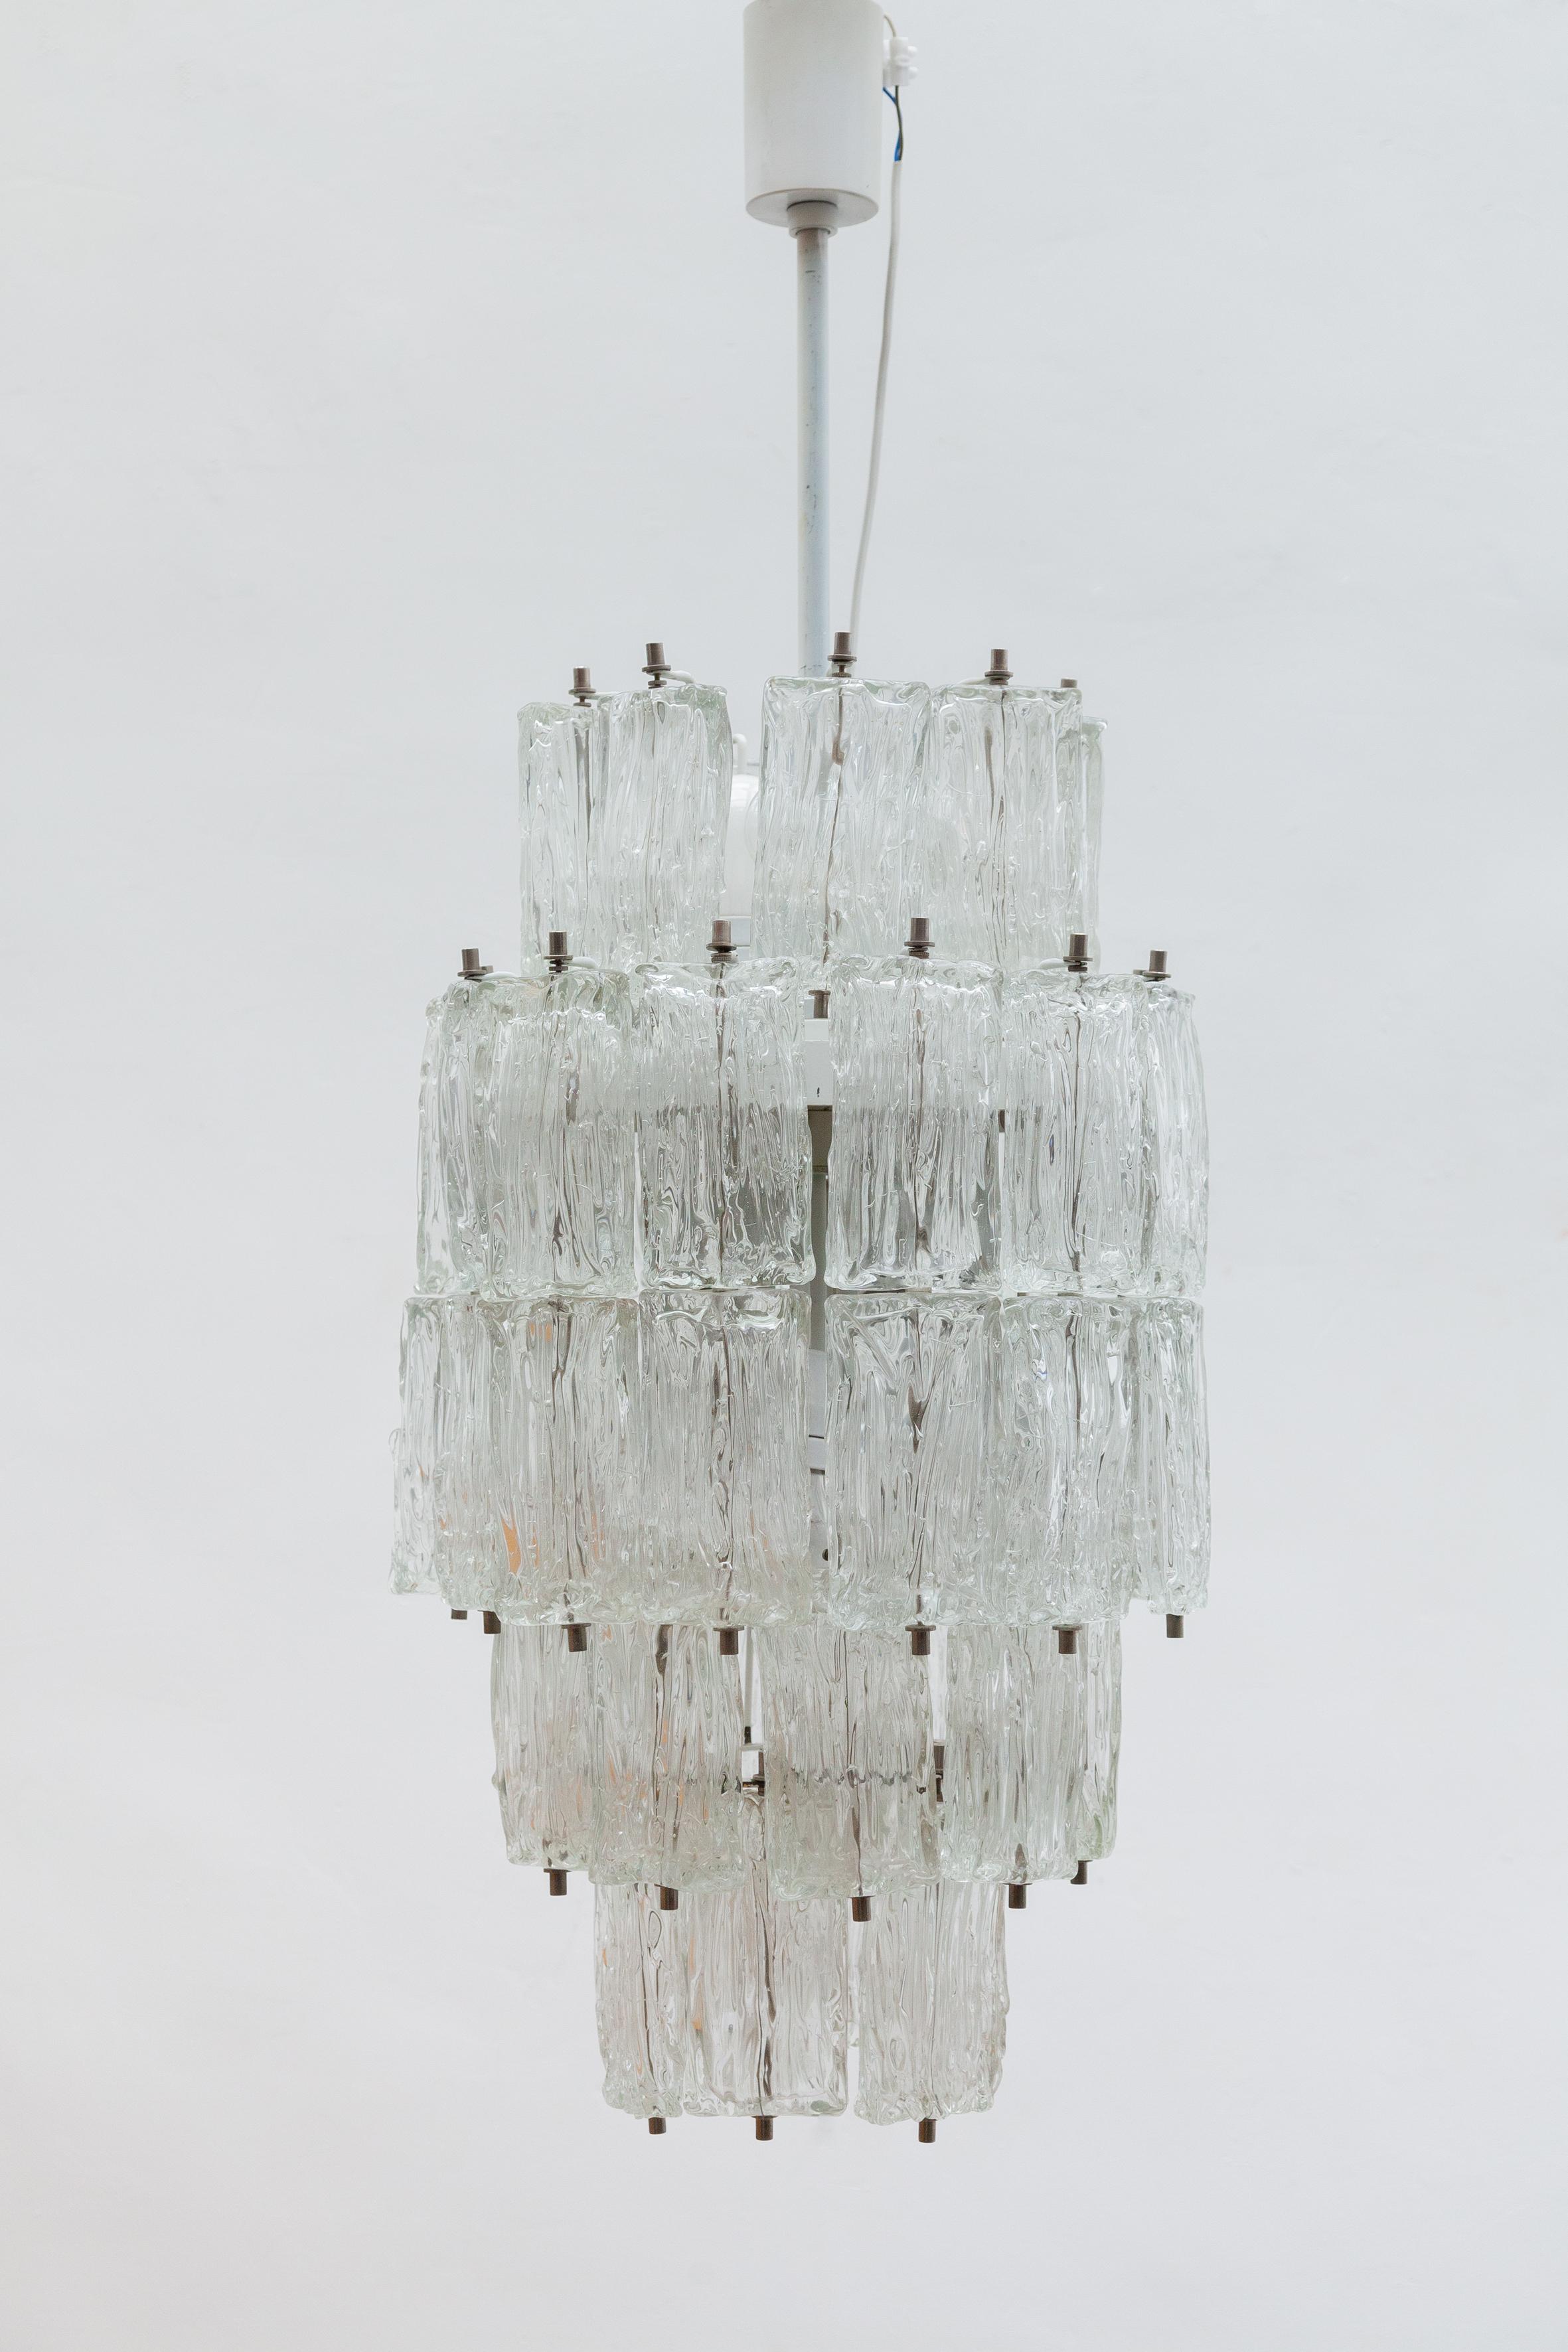 Mid-Century Modern Venini Large Chandelier Iced Textured Clear Glass Five Tiers 1960s Murano, Italy